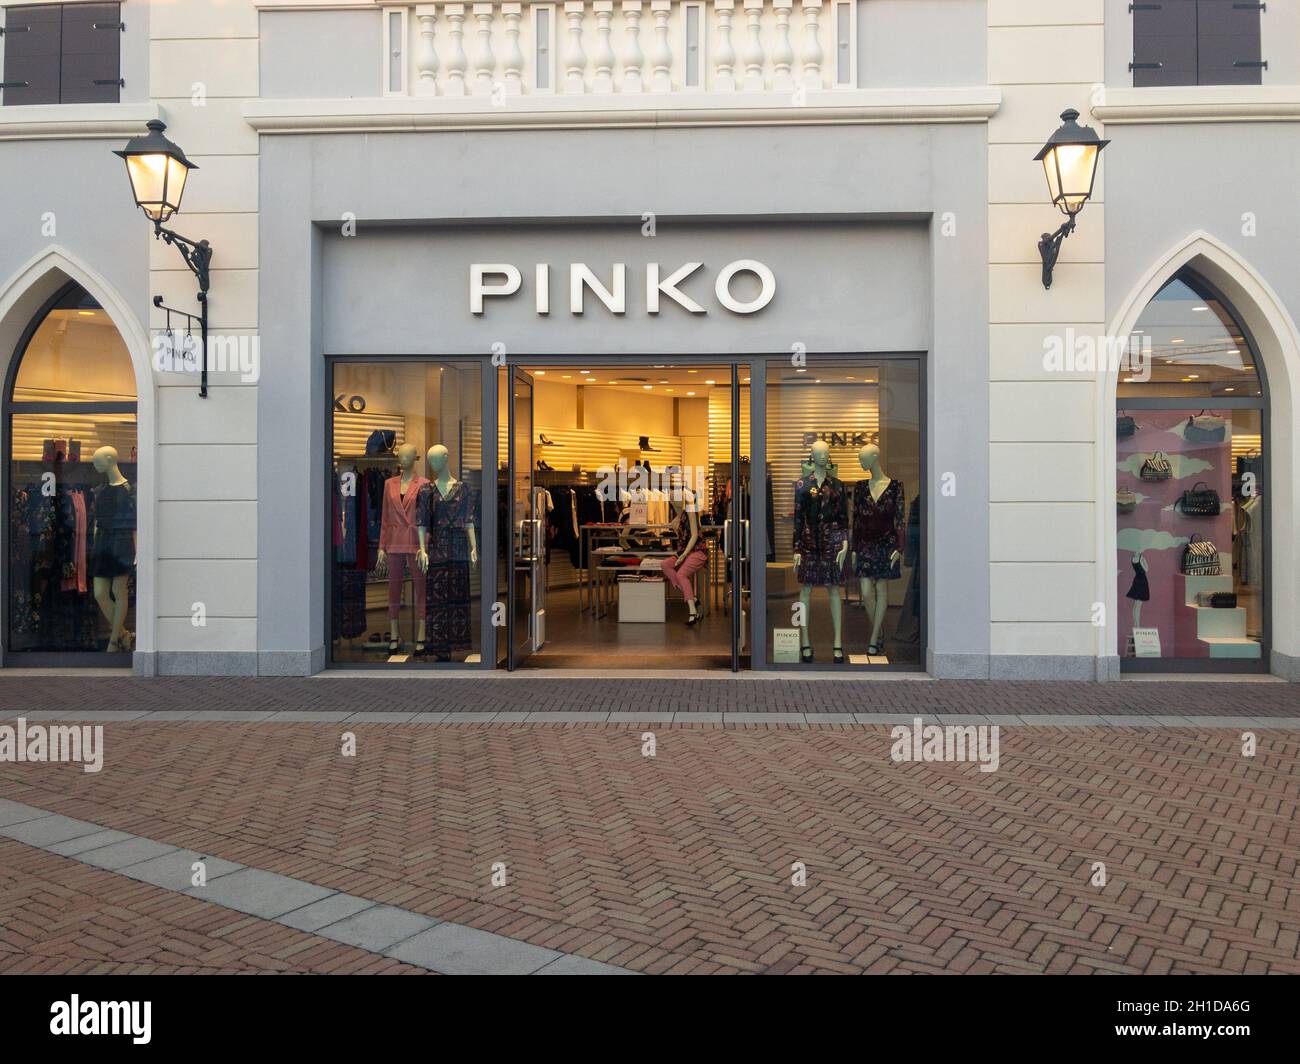 Pinko Fashion Store High Resolution Stock Photography and Images - Alamy